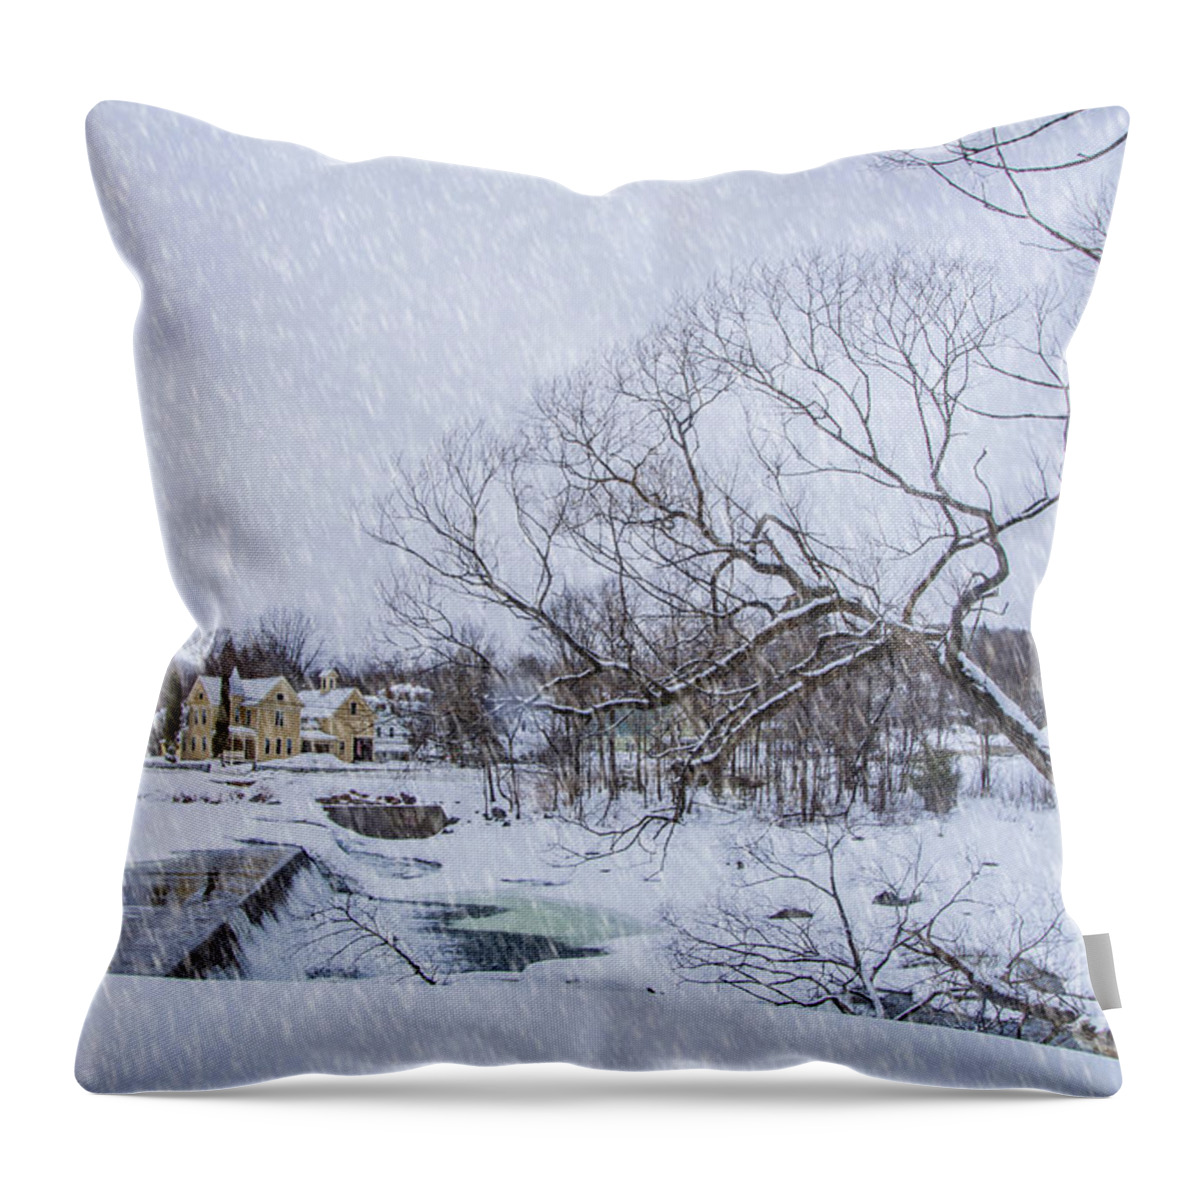 Birch Throw Pillow featuring the photograph Snowy Day #1 by Alana Ranney